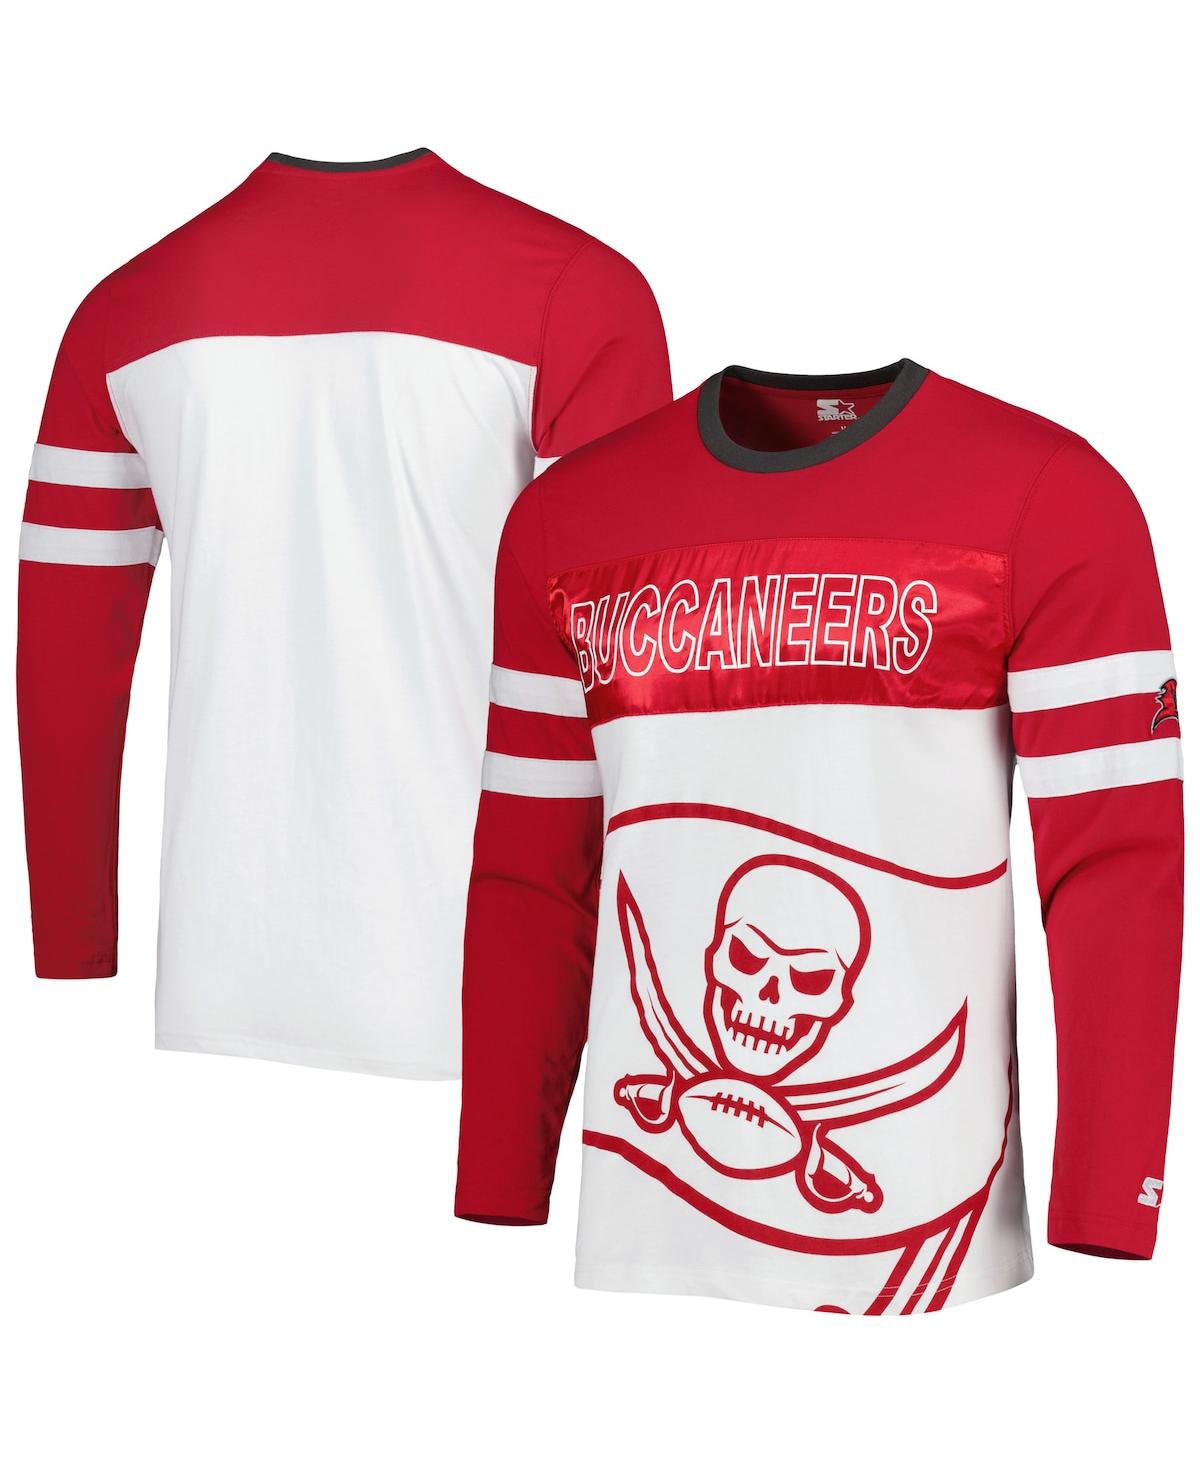 Men's Starter Red, White Tampa Bay Buccaneers Halftime Long Sleeve T-shirt - Red, White